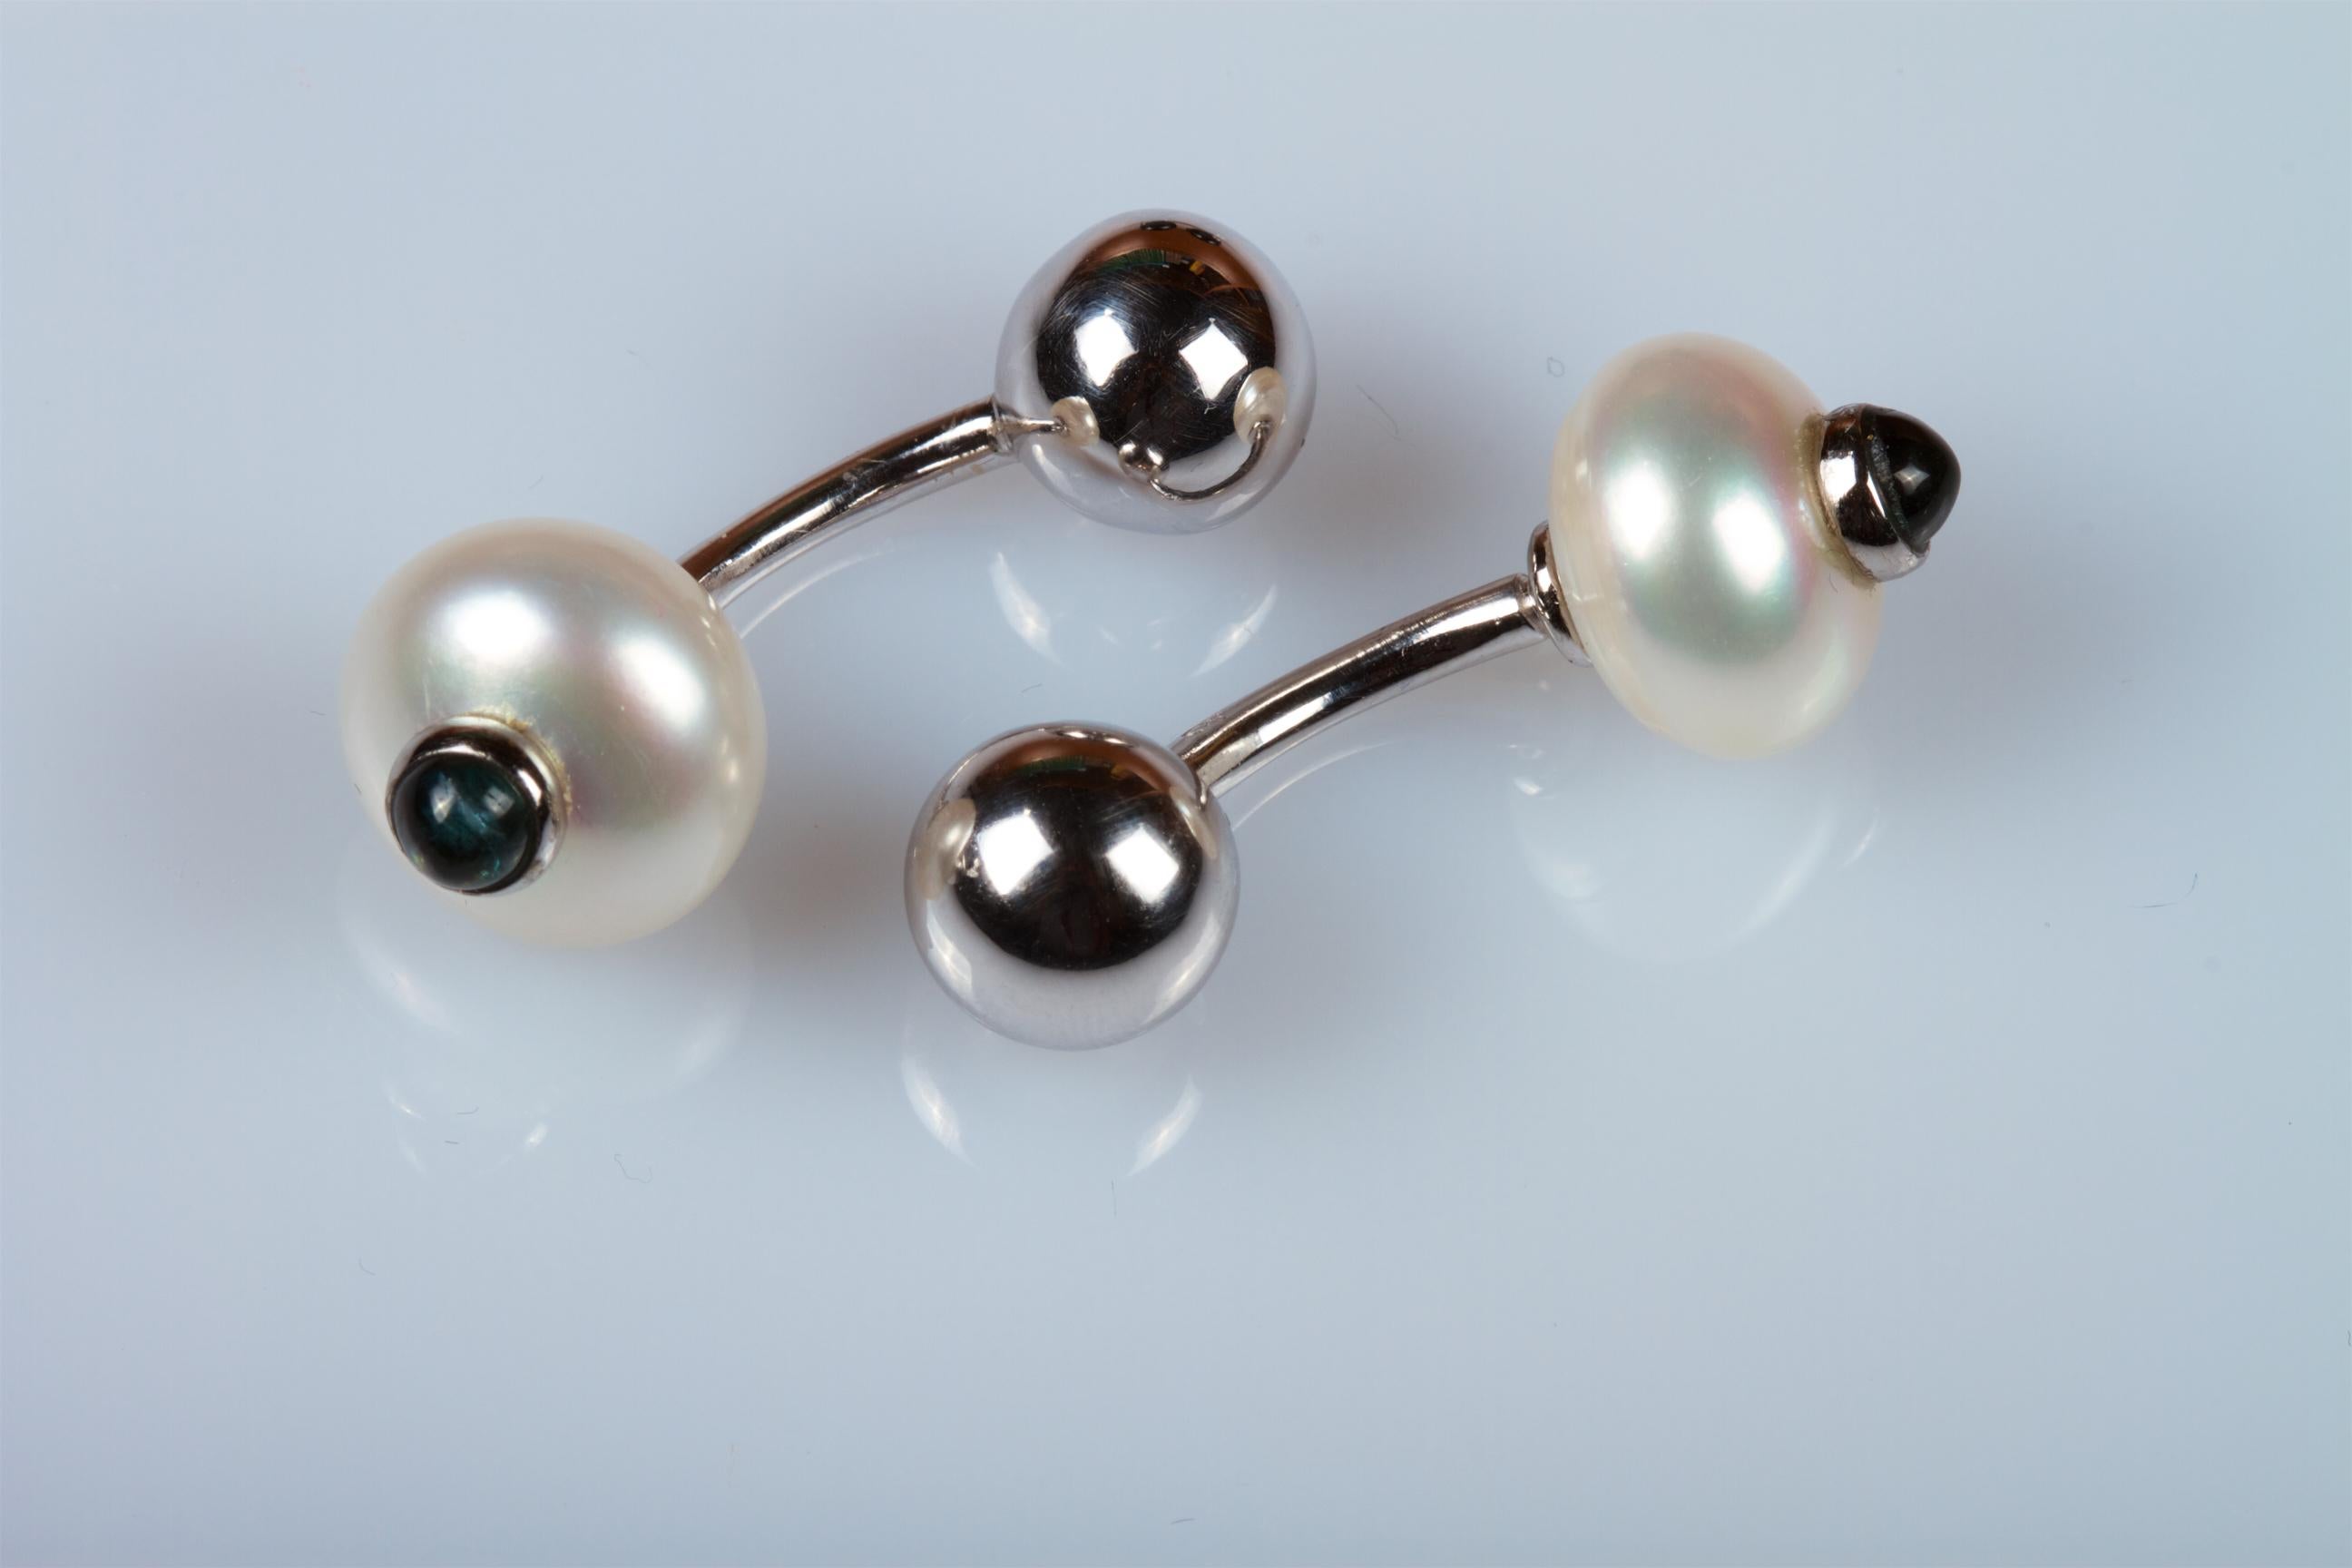 18 carat white gold cufflinks with interchangeable heads composed of:
- 2 cultured whit  pearls of a slightly flattened shape, diameter 12/13 mm, with 2 cabouchons of 0.30 carat round sapphires
- 2  onyx spheres, diameter 12.5 mm
Total weight: 10.8